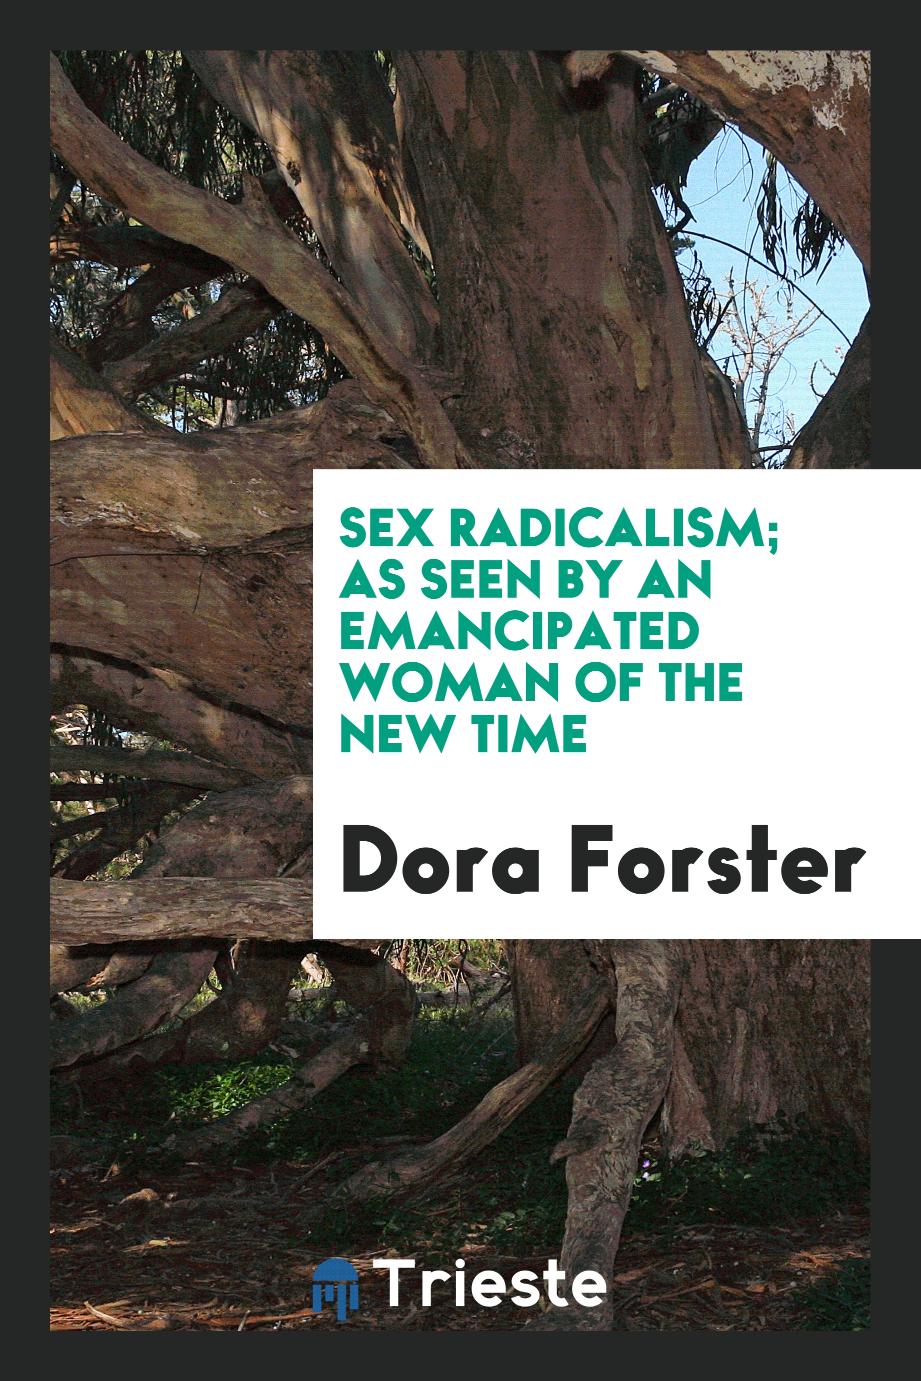 Sex Radicalism; As seen by an emancipated woman of the new time